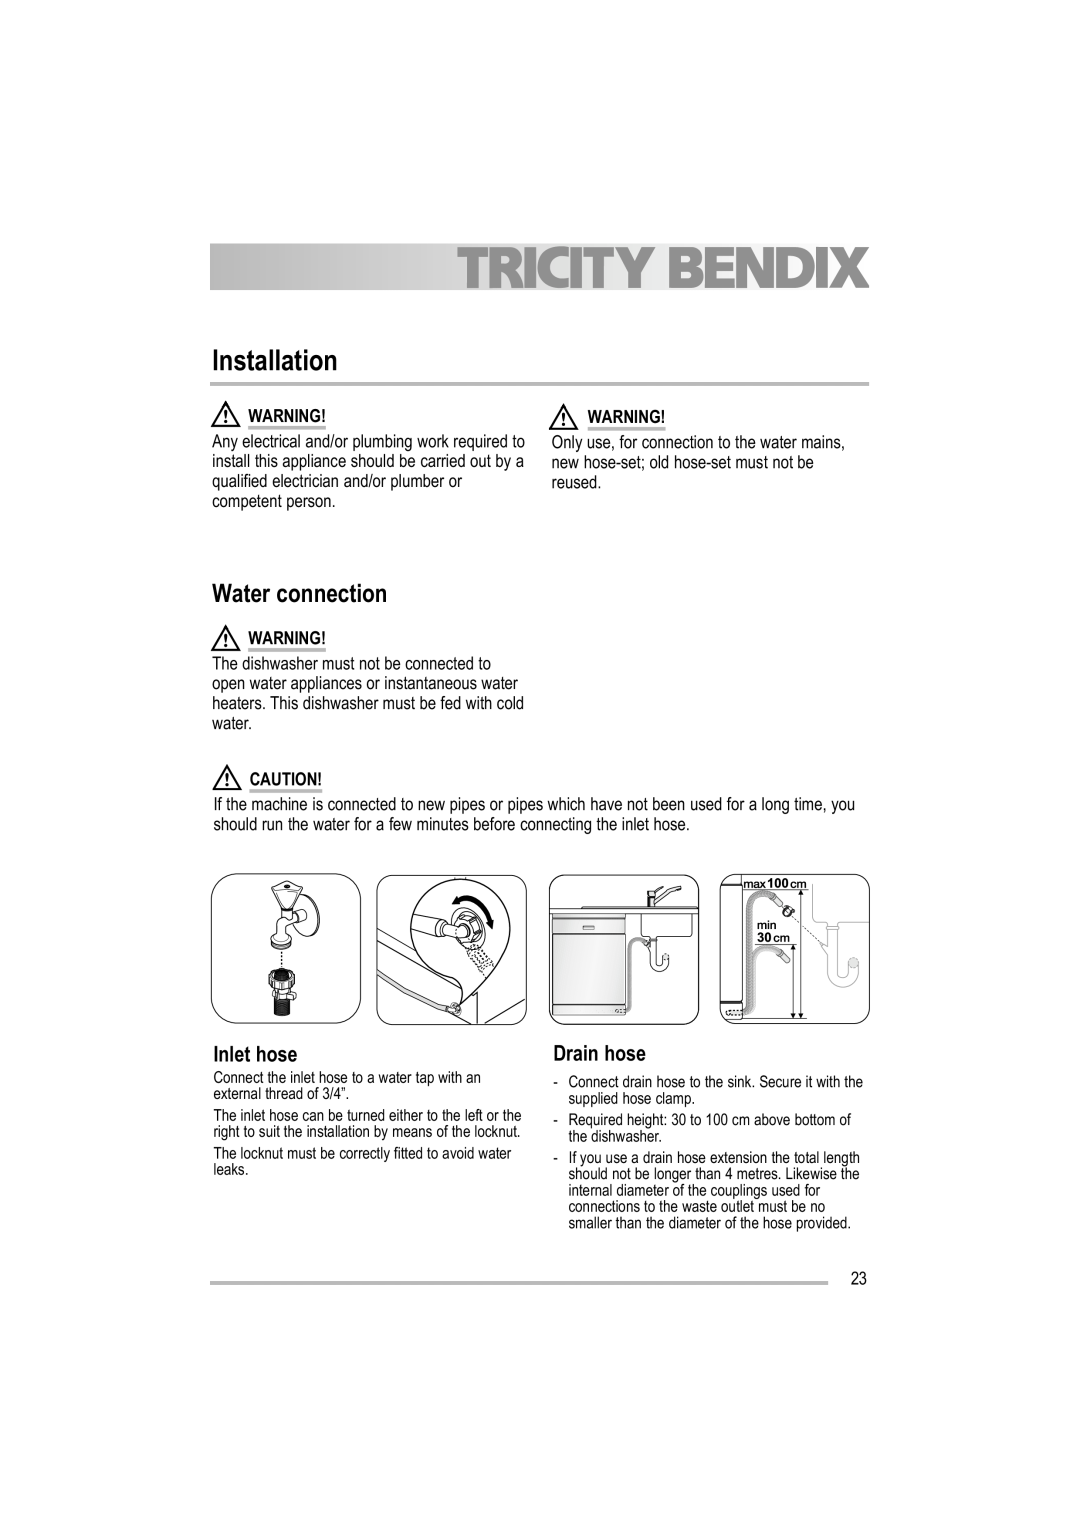 Tricity Bendix TBDW 32 manual Installation, Water connection, Inlet hose, Drain hose 